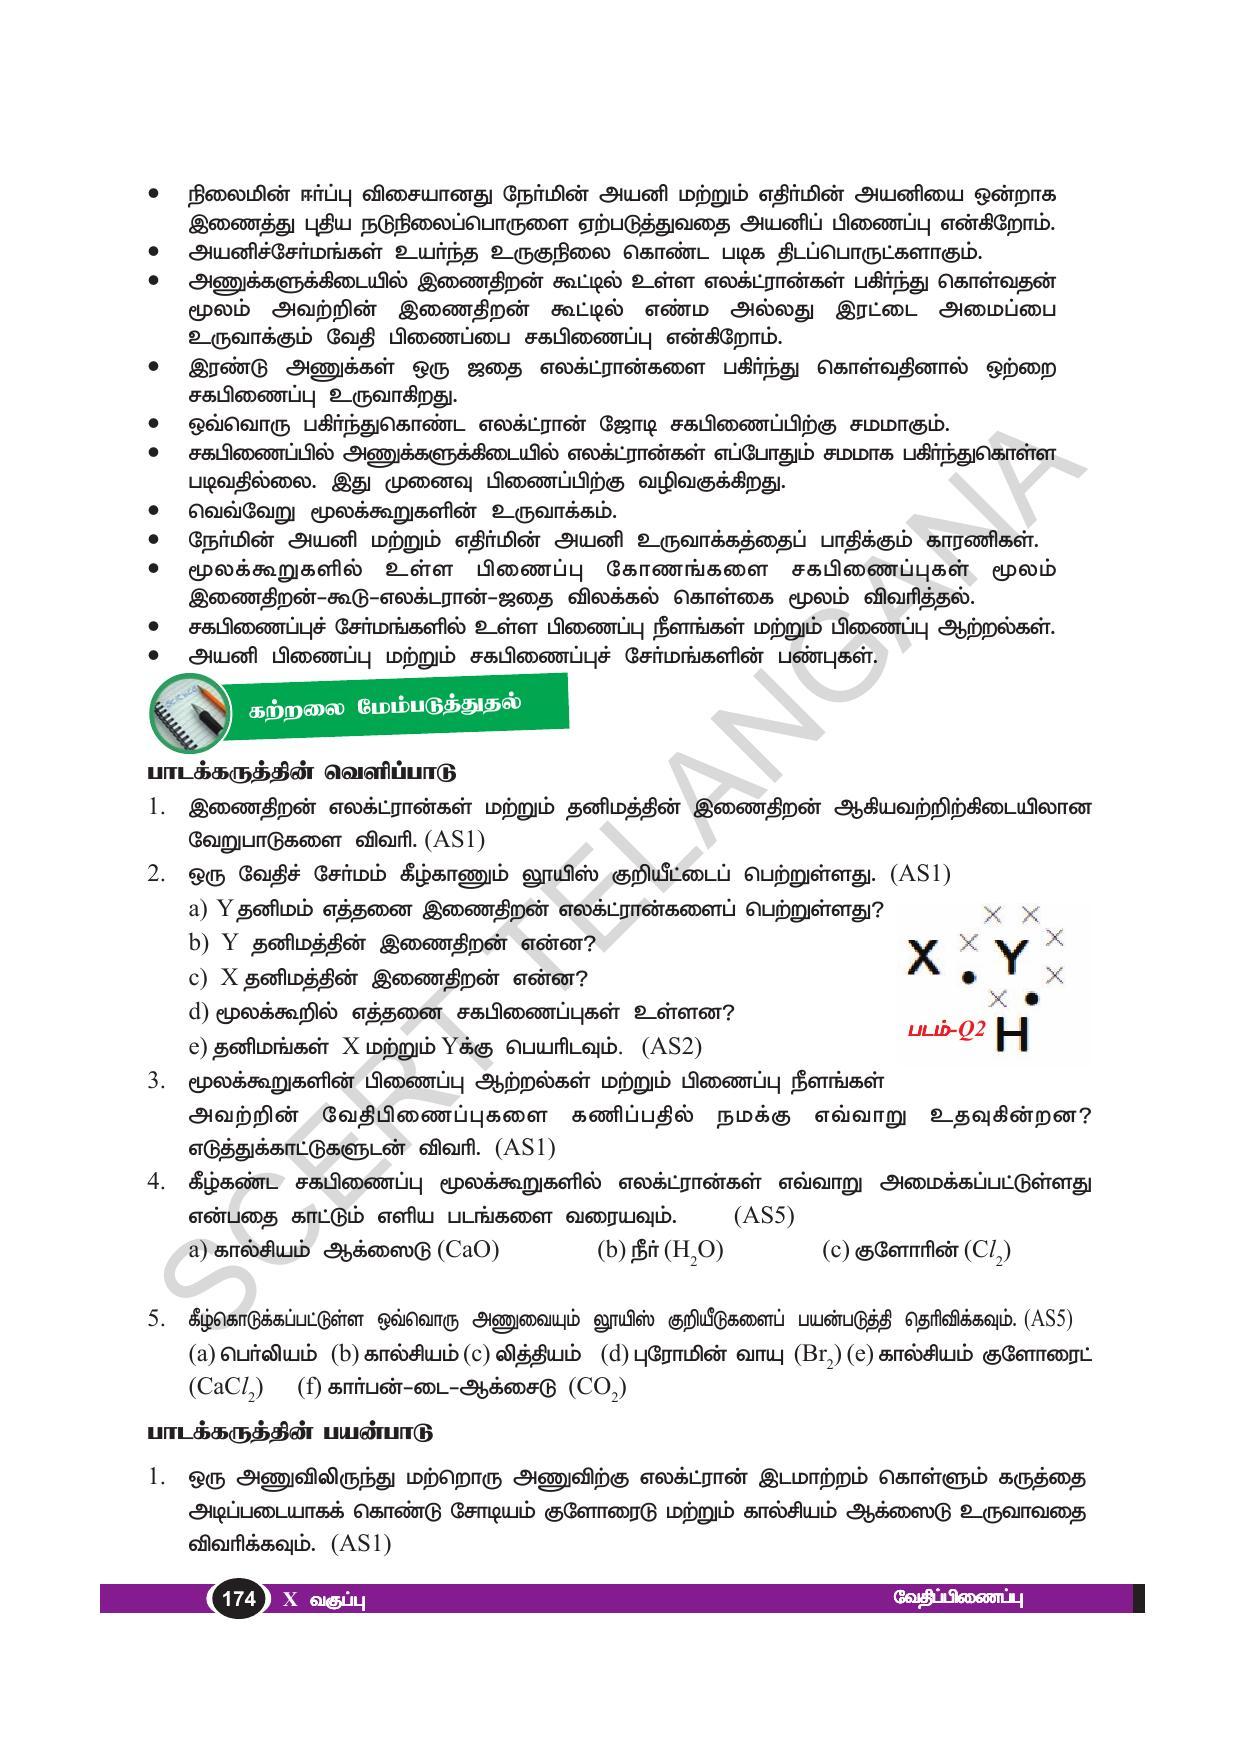 TS SCERT Class 10 Physical Science(Tamil Medium) Text Book - Page 186